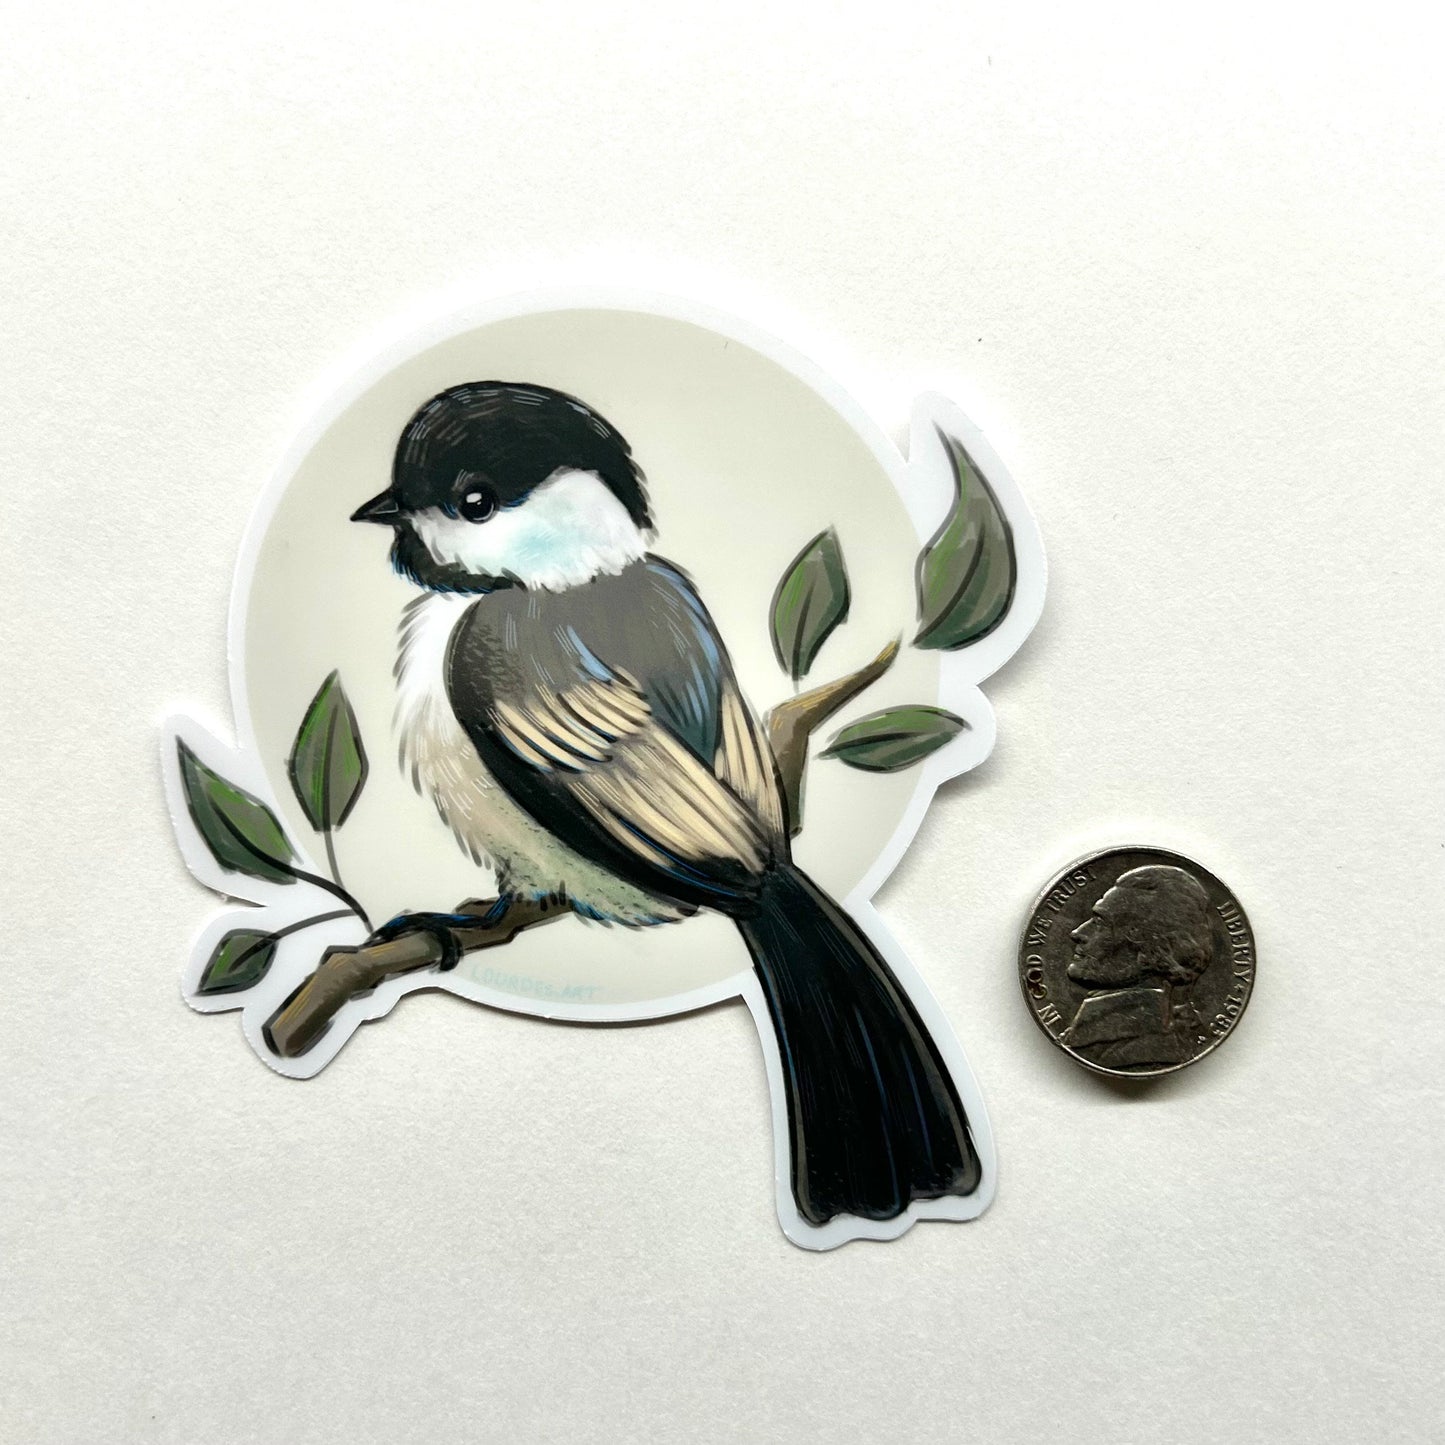 Cute Northeastern Chickadee Vinyl Sticker - Perfect for Ornithologists, Birdwatchers, and Sticker Collectors